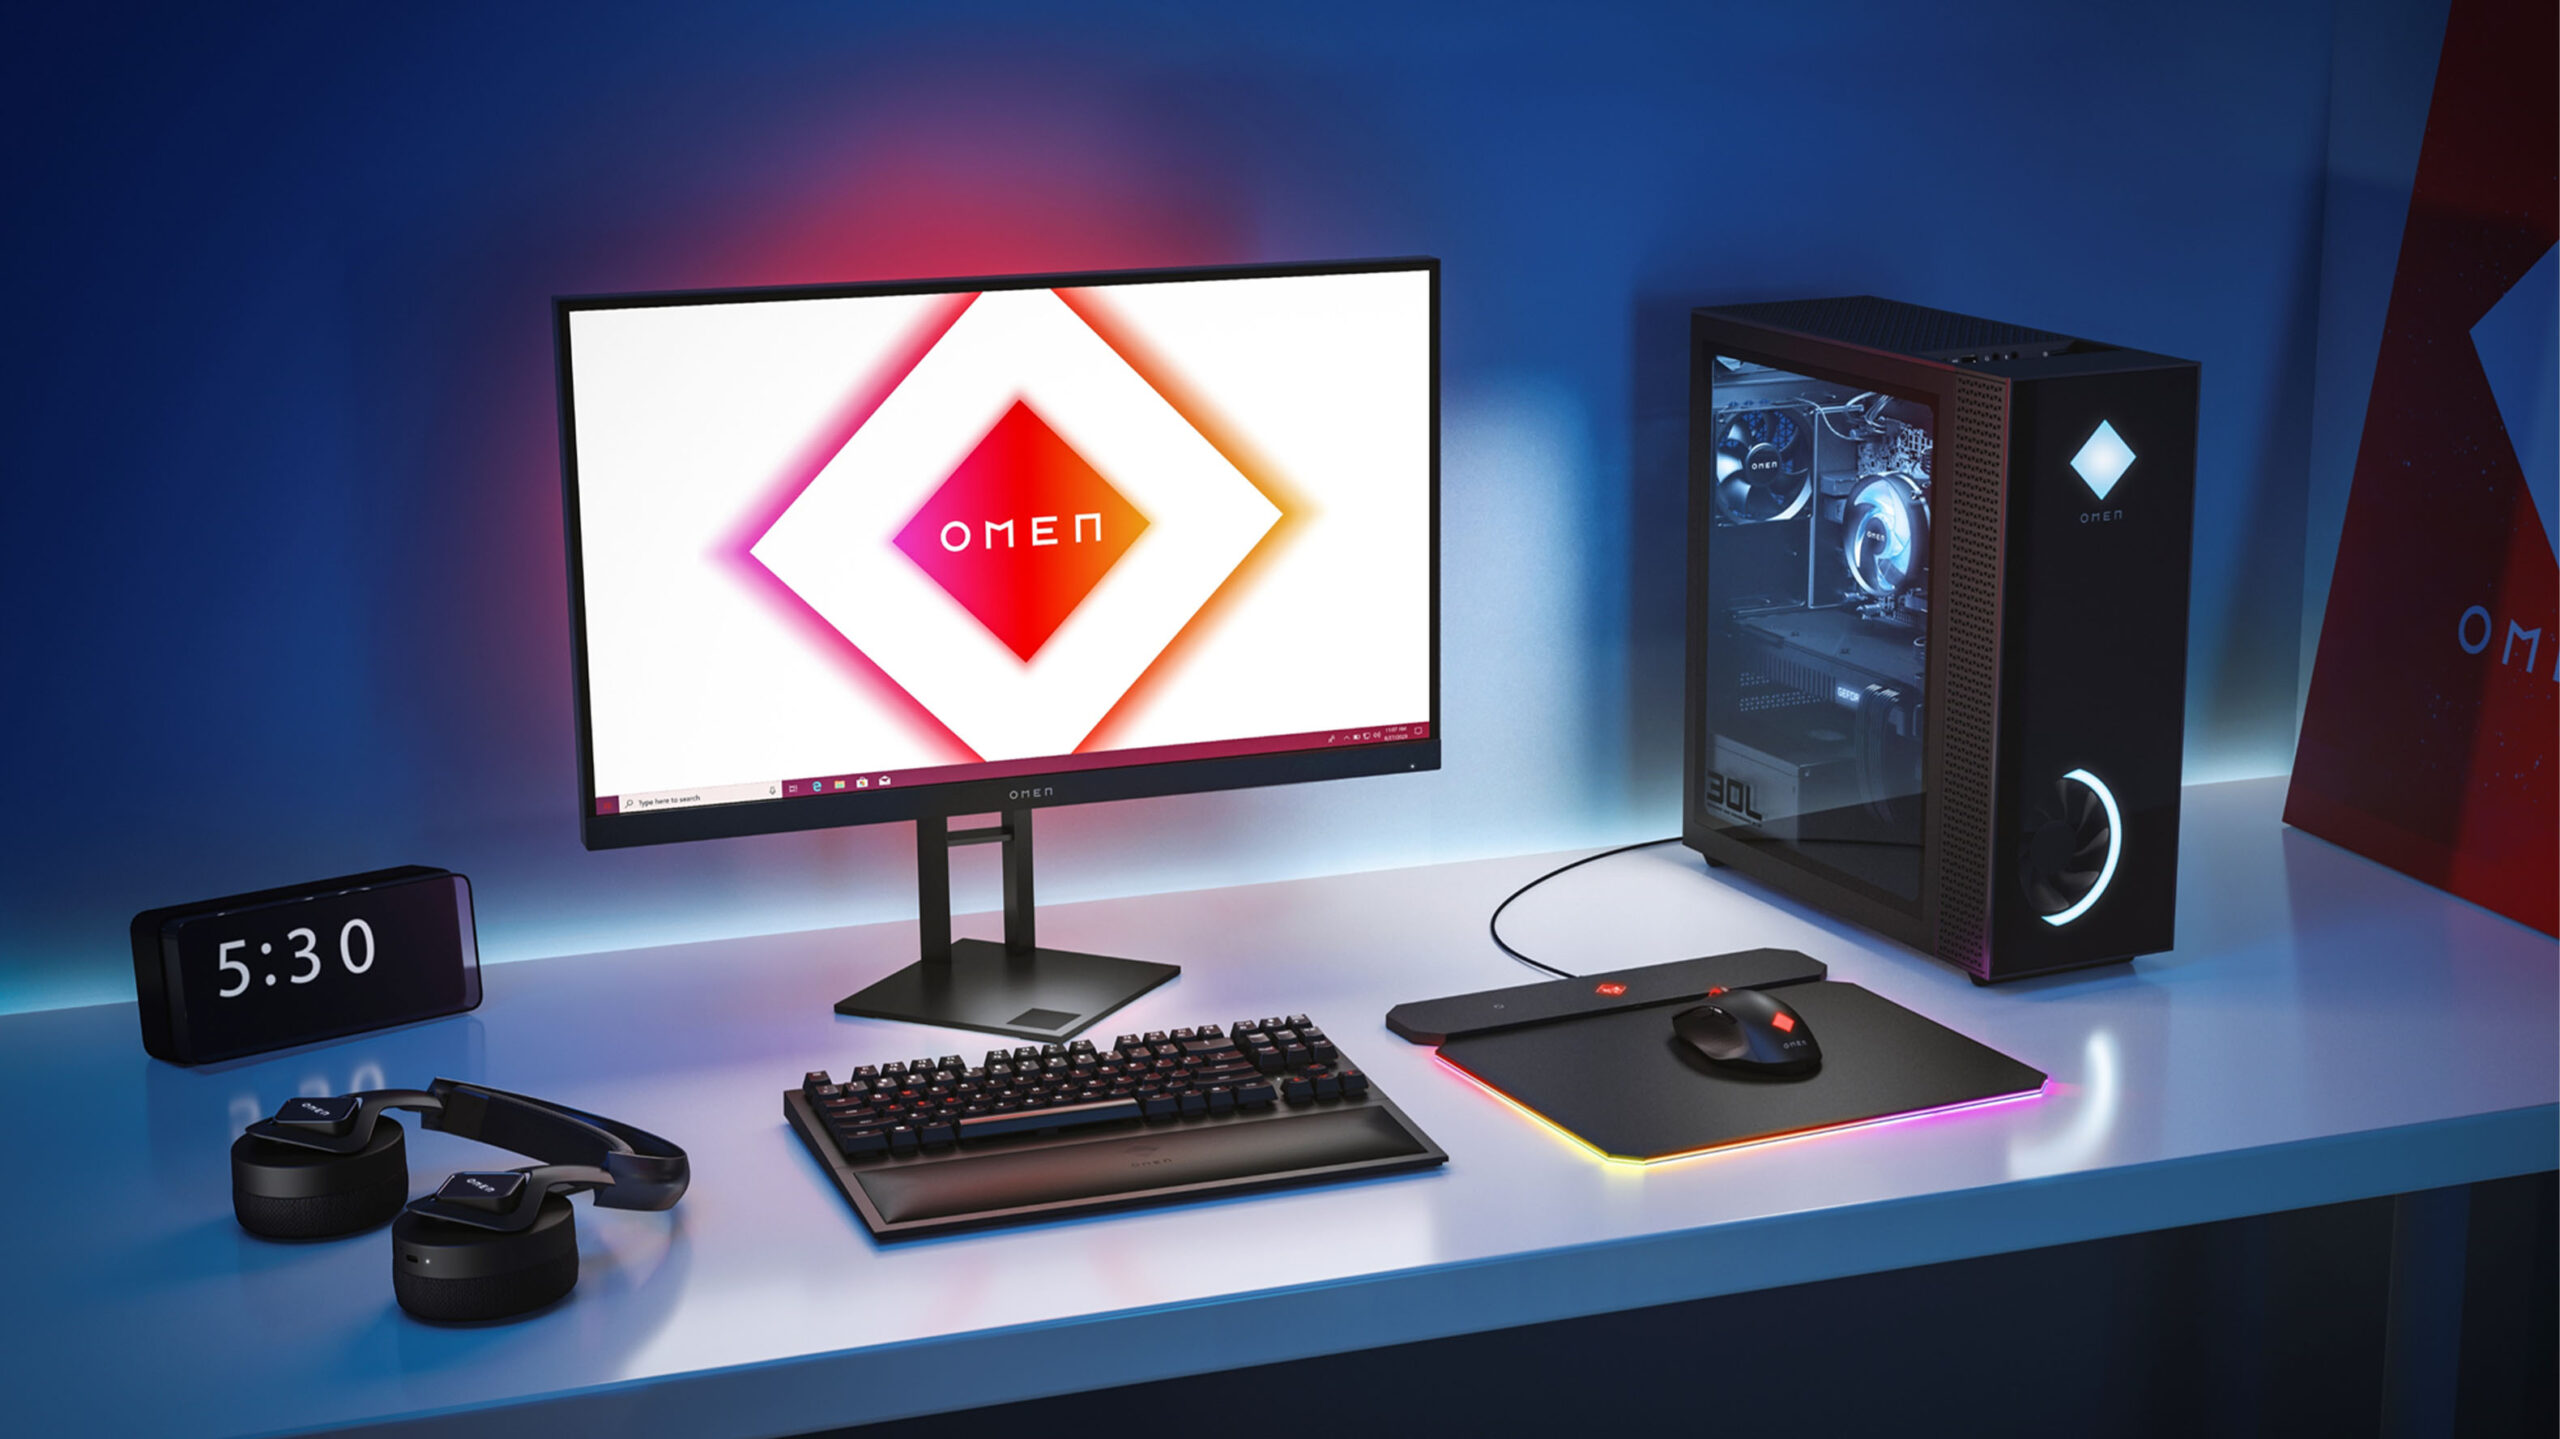 Hp Announces Omen Desktops With Up To Nvidia Rtx 3090 Graphics New Gaming Accessories